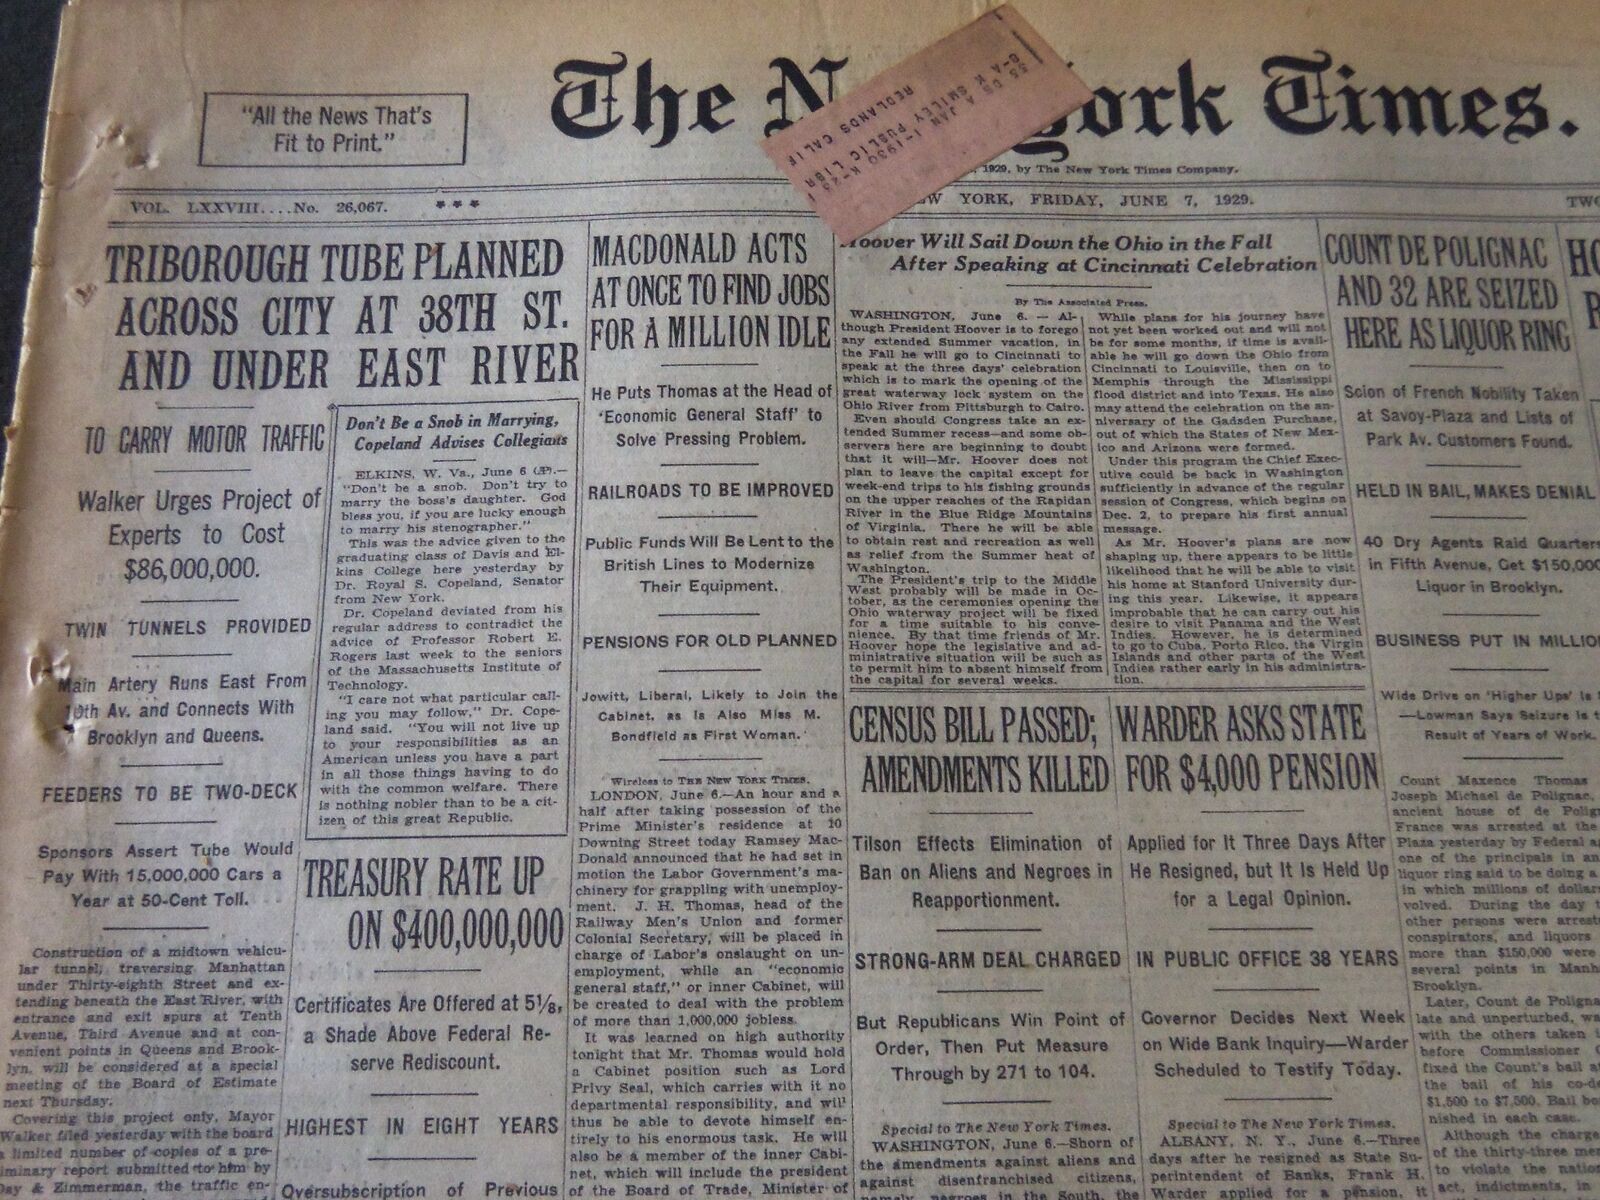 1929 JUNE 7 NEW YORK TIMES - TRIBOROUGH TUBE PLANNED UNDER EAST RIVER - NT 6573